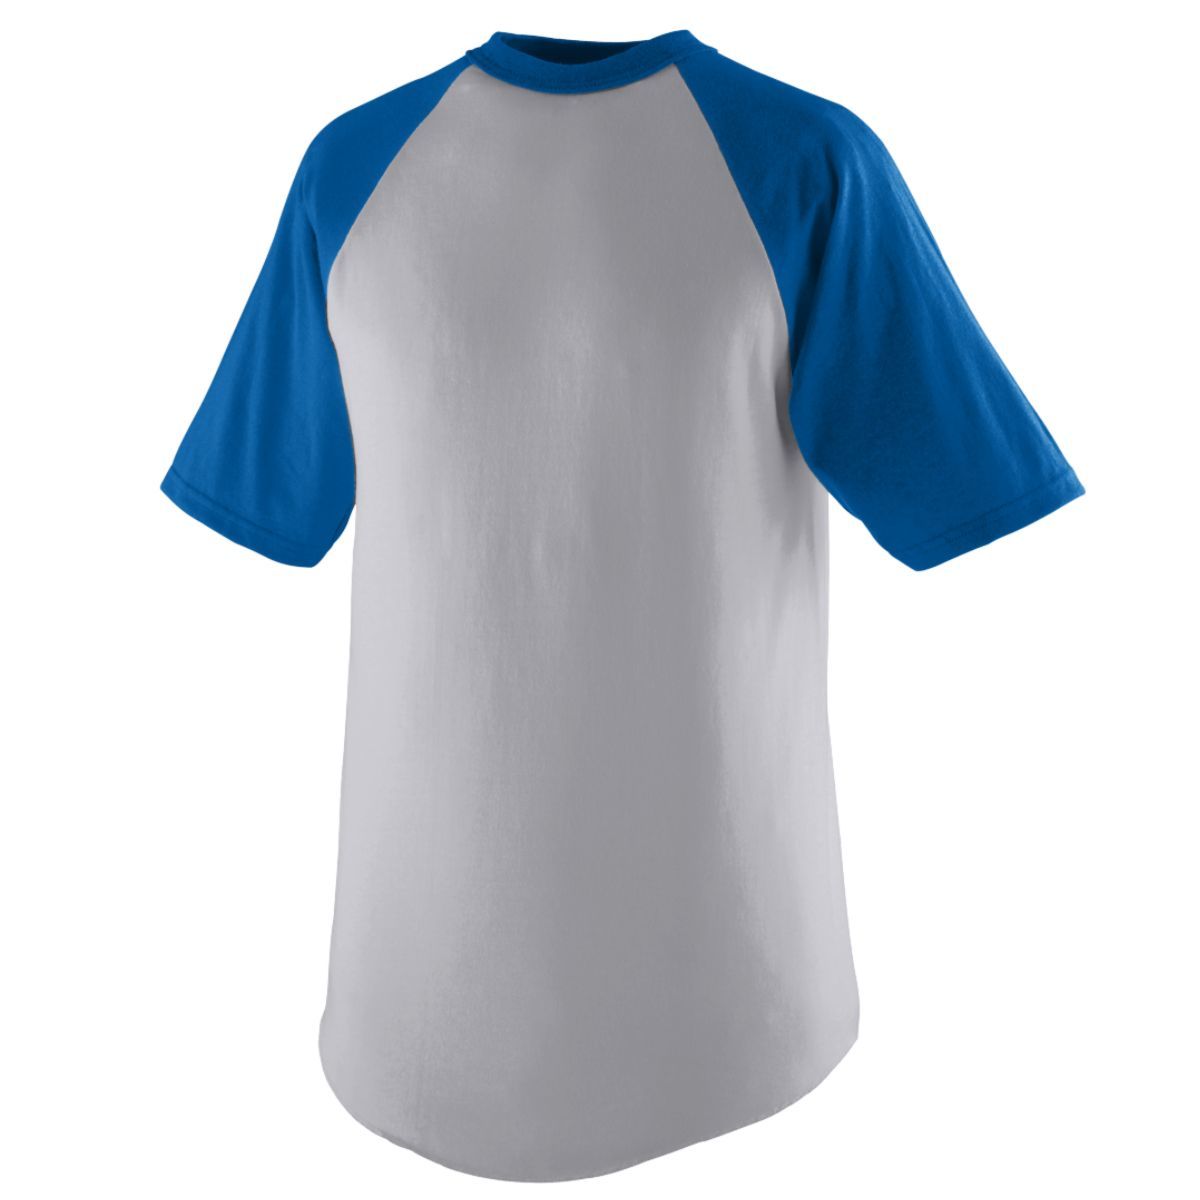 Augusta Sportswear Youth Short Sleeve Baseball Jersey in Athletic Heather/Royal  -Part of the Youth, Youth-Jersey, Augusta-Products, Baseball, Shirts, All-Sports, All-Sports-1 product lines at KanaleyCreations.com